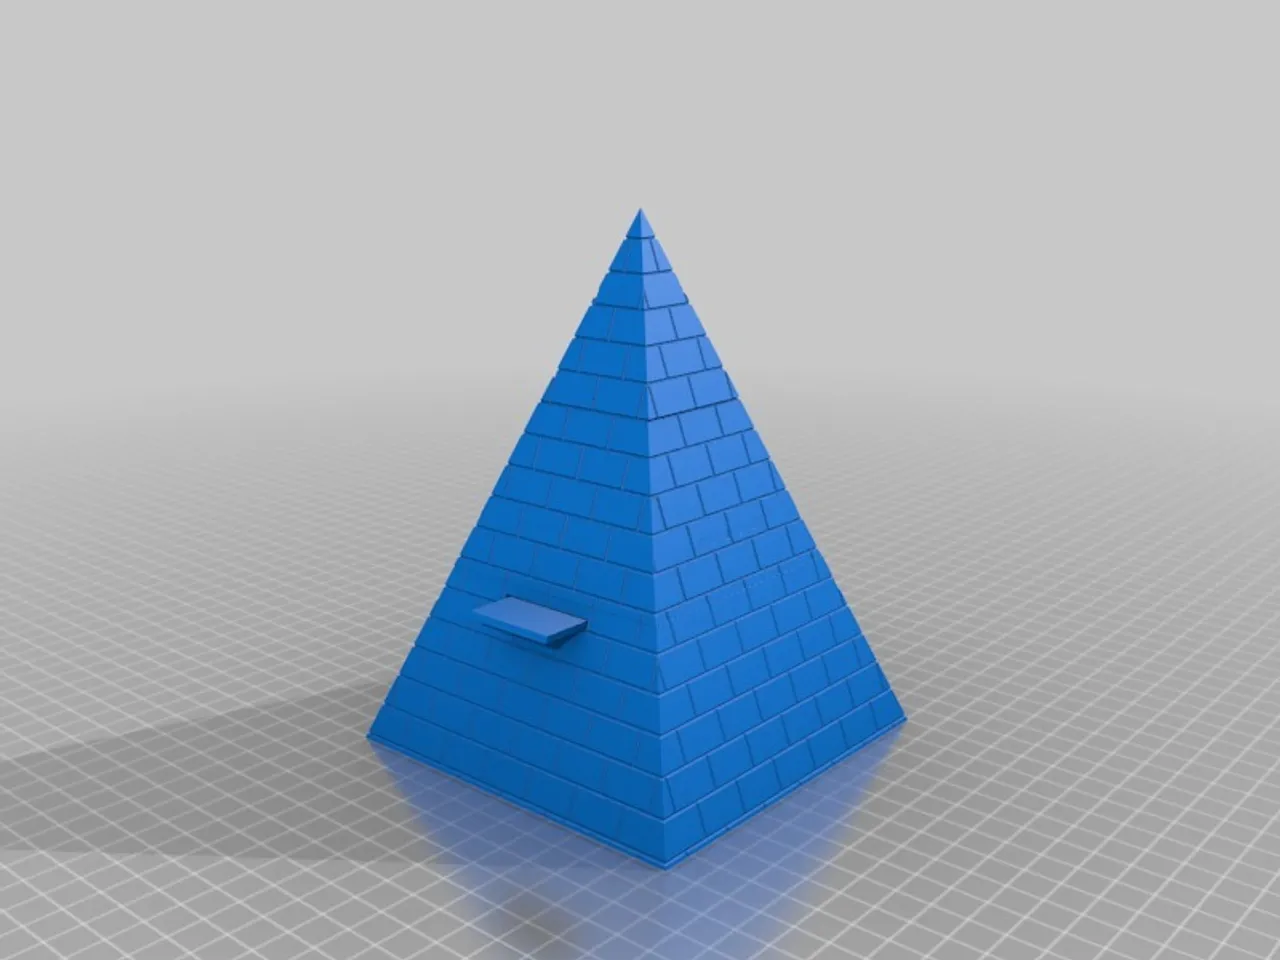 Camel Up replacement 3D printed pyramid